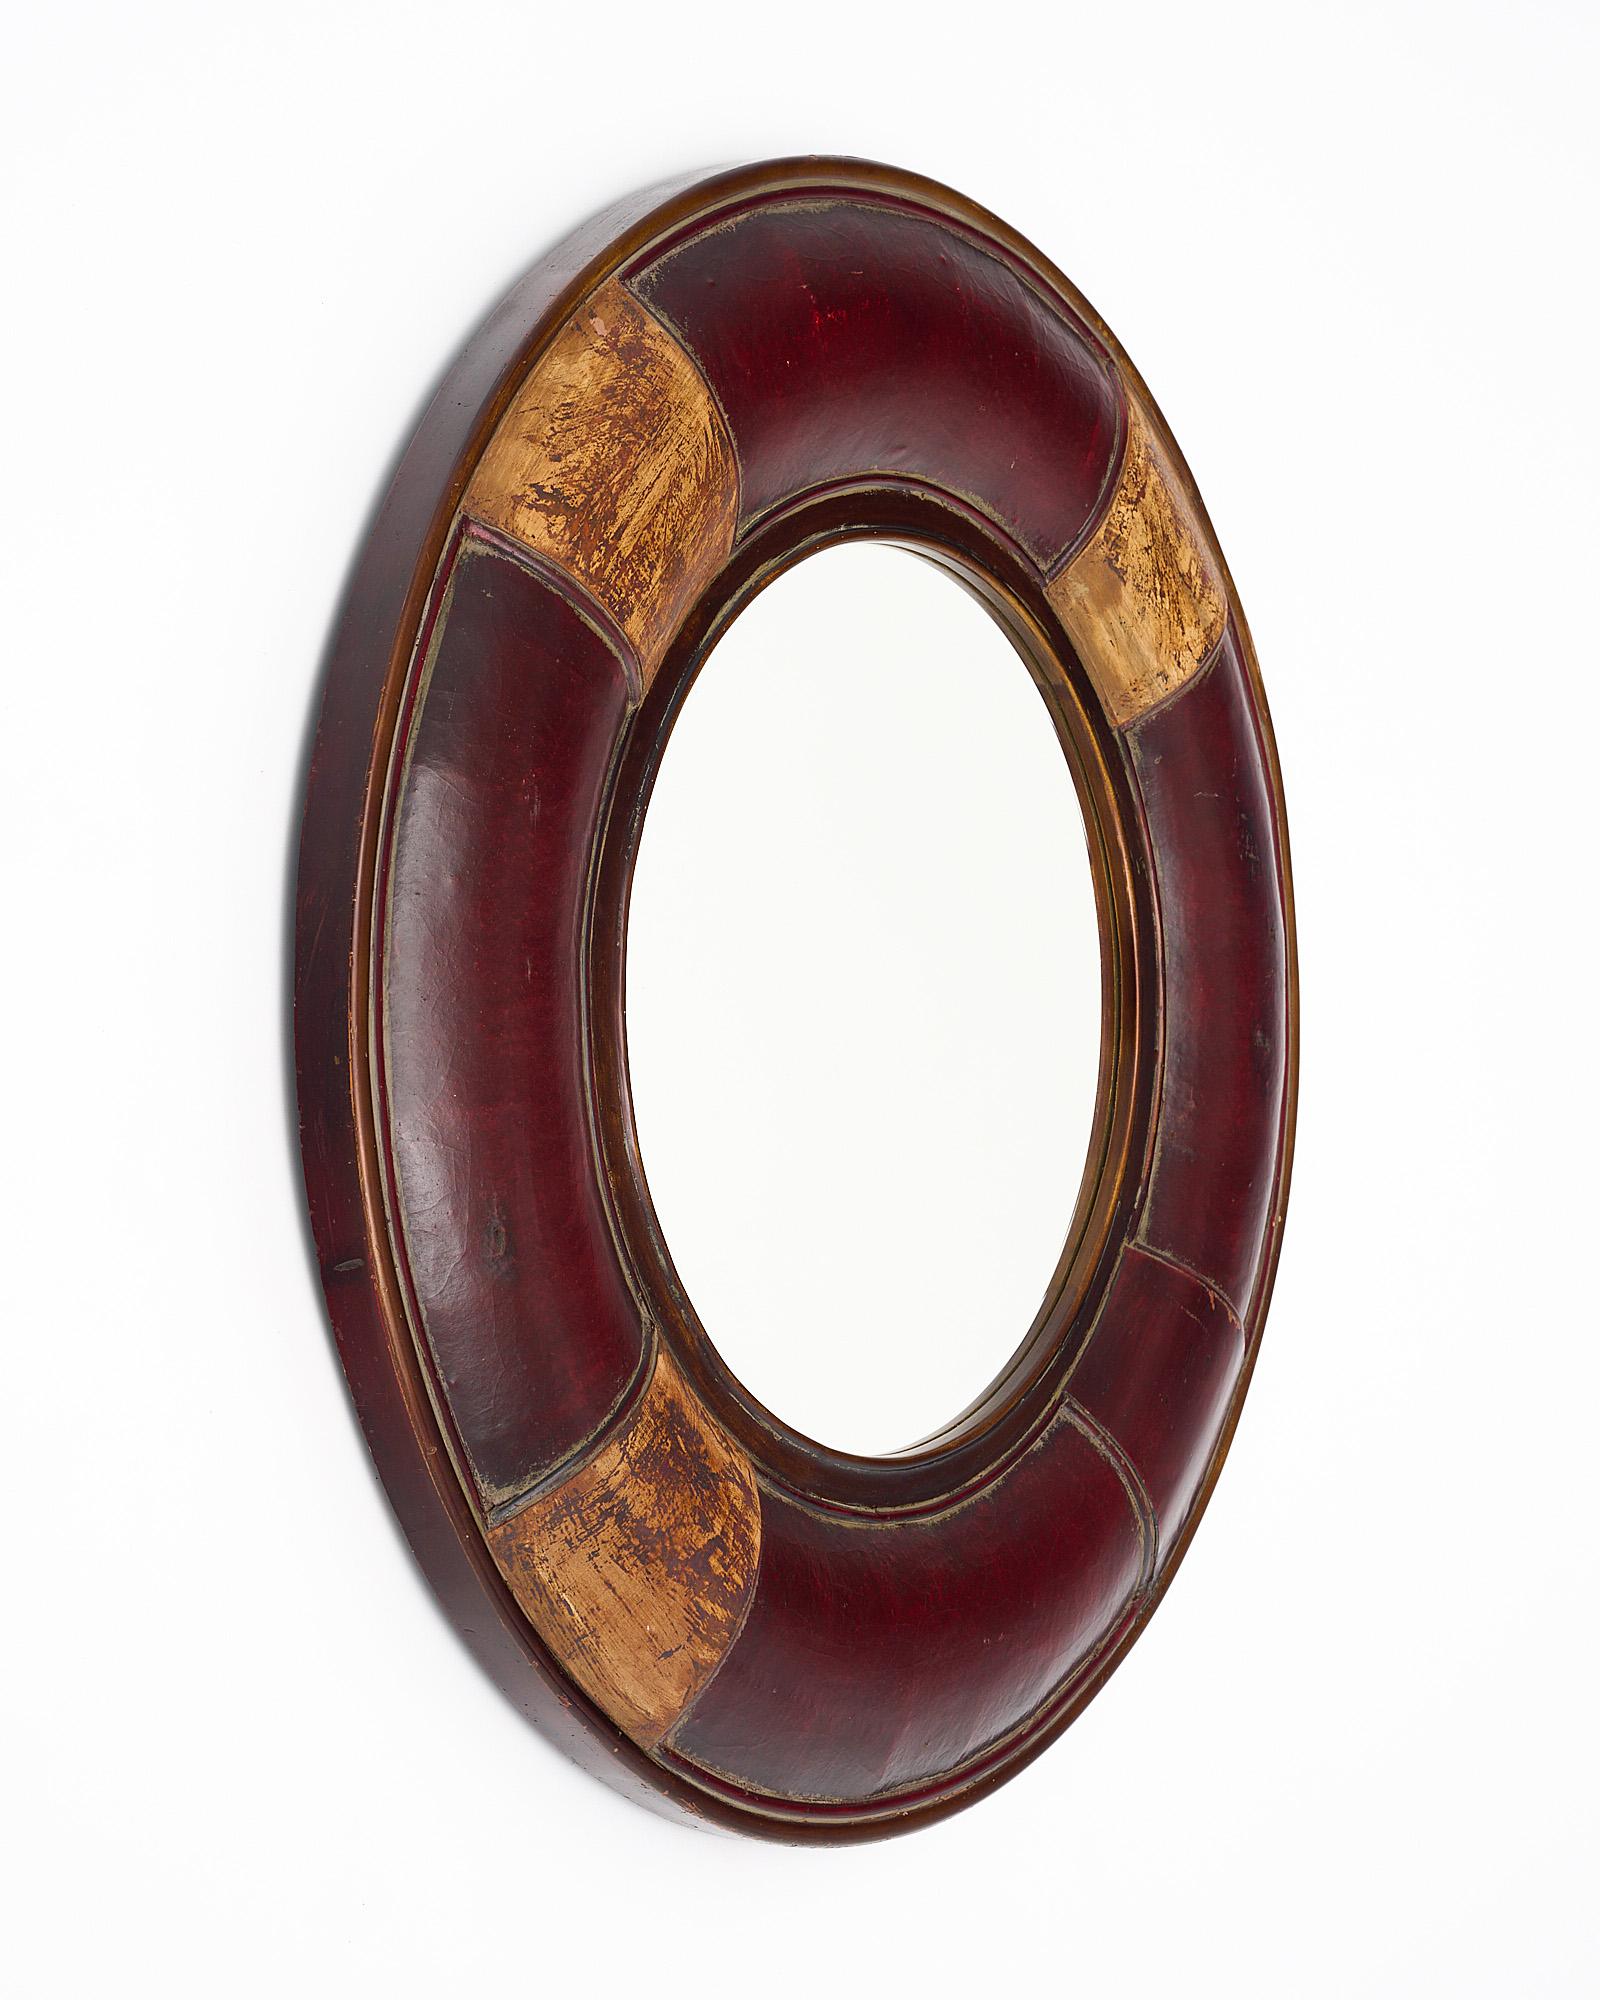 Mirror from France made with a circular frame covered in brown leather. This unique piece features gold leafed accents and a central circular mirror.
